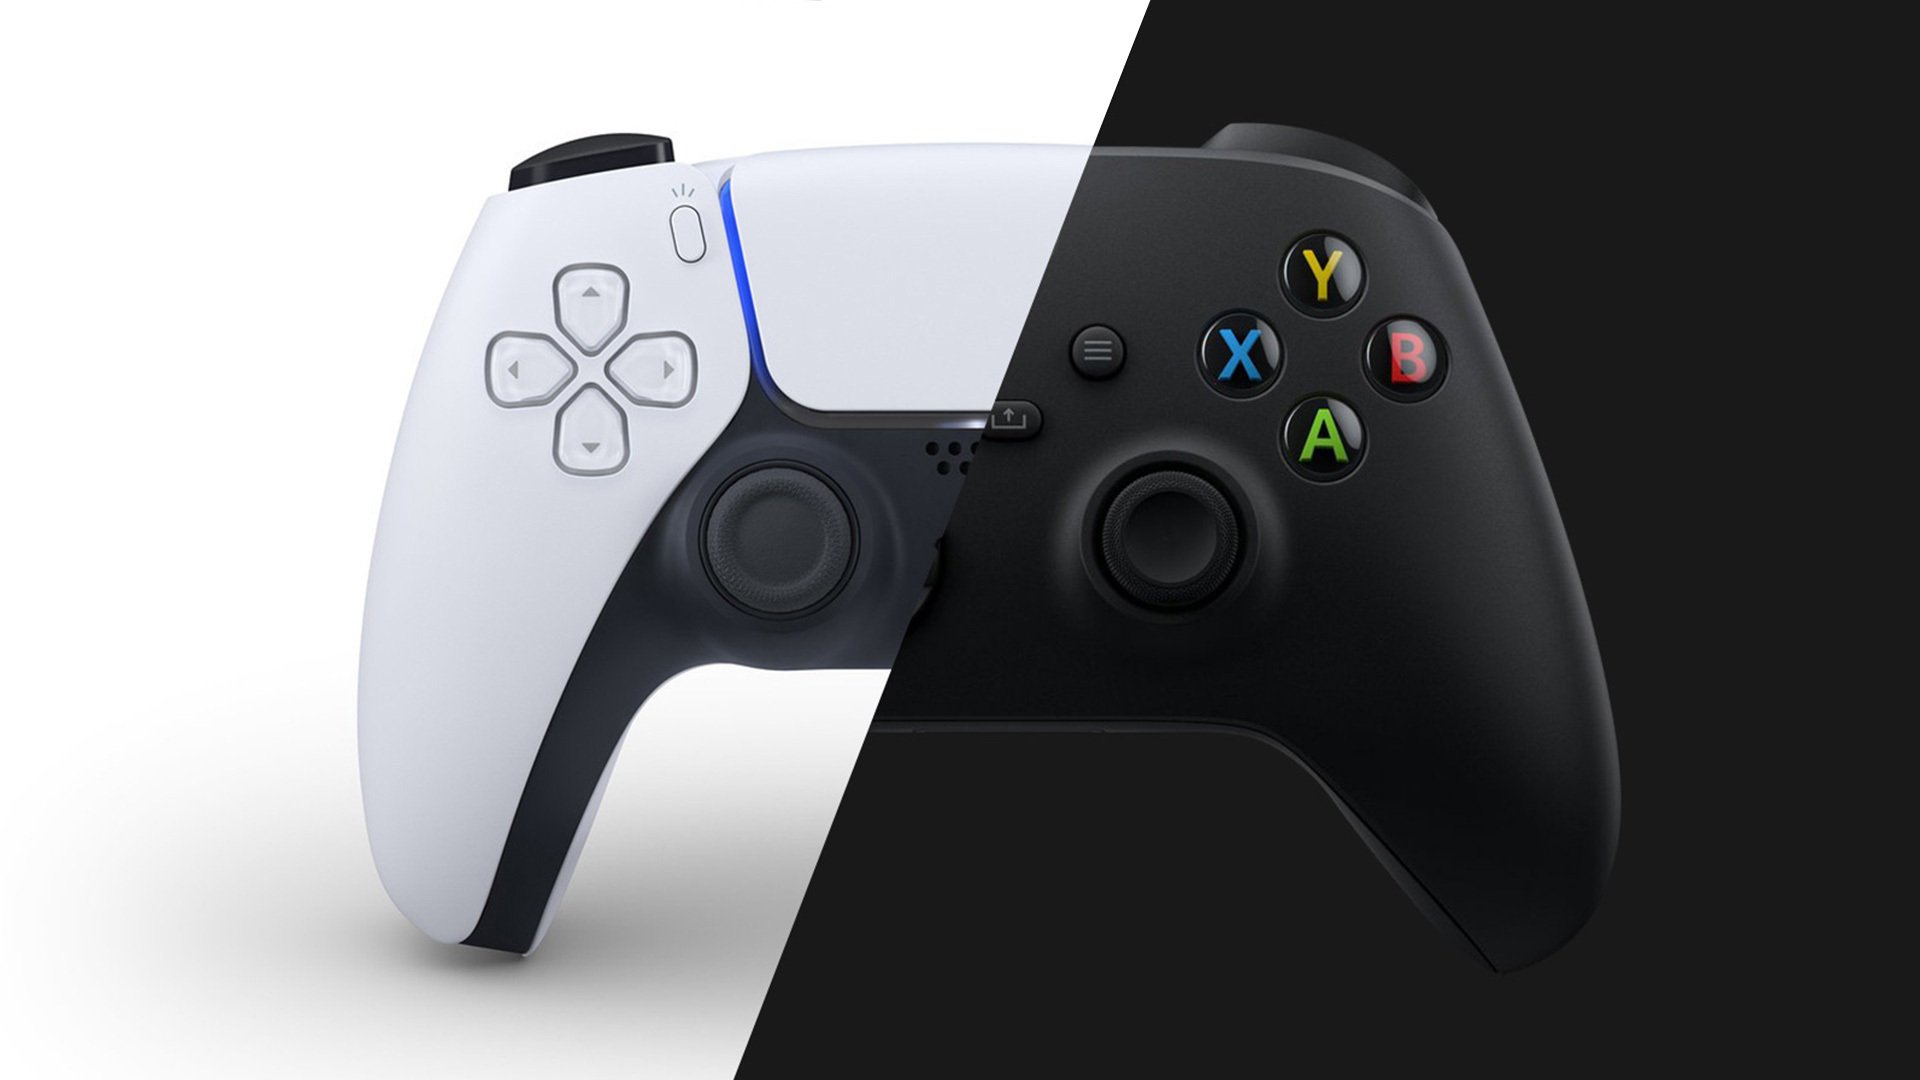 Xbox Series S Black vs PS5 Digital comparison: Which gaming console to buy?